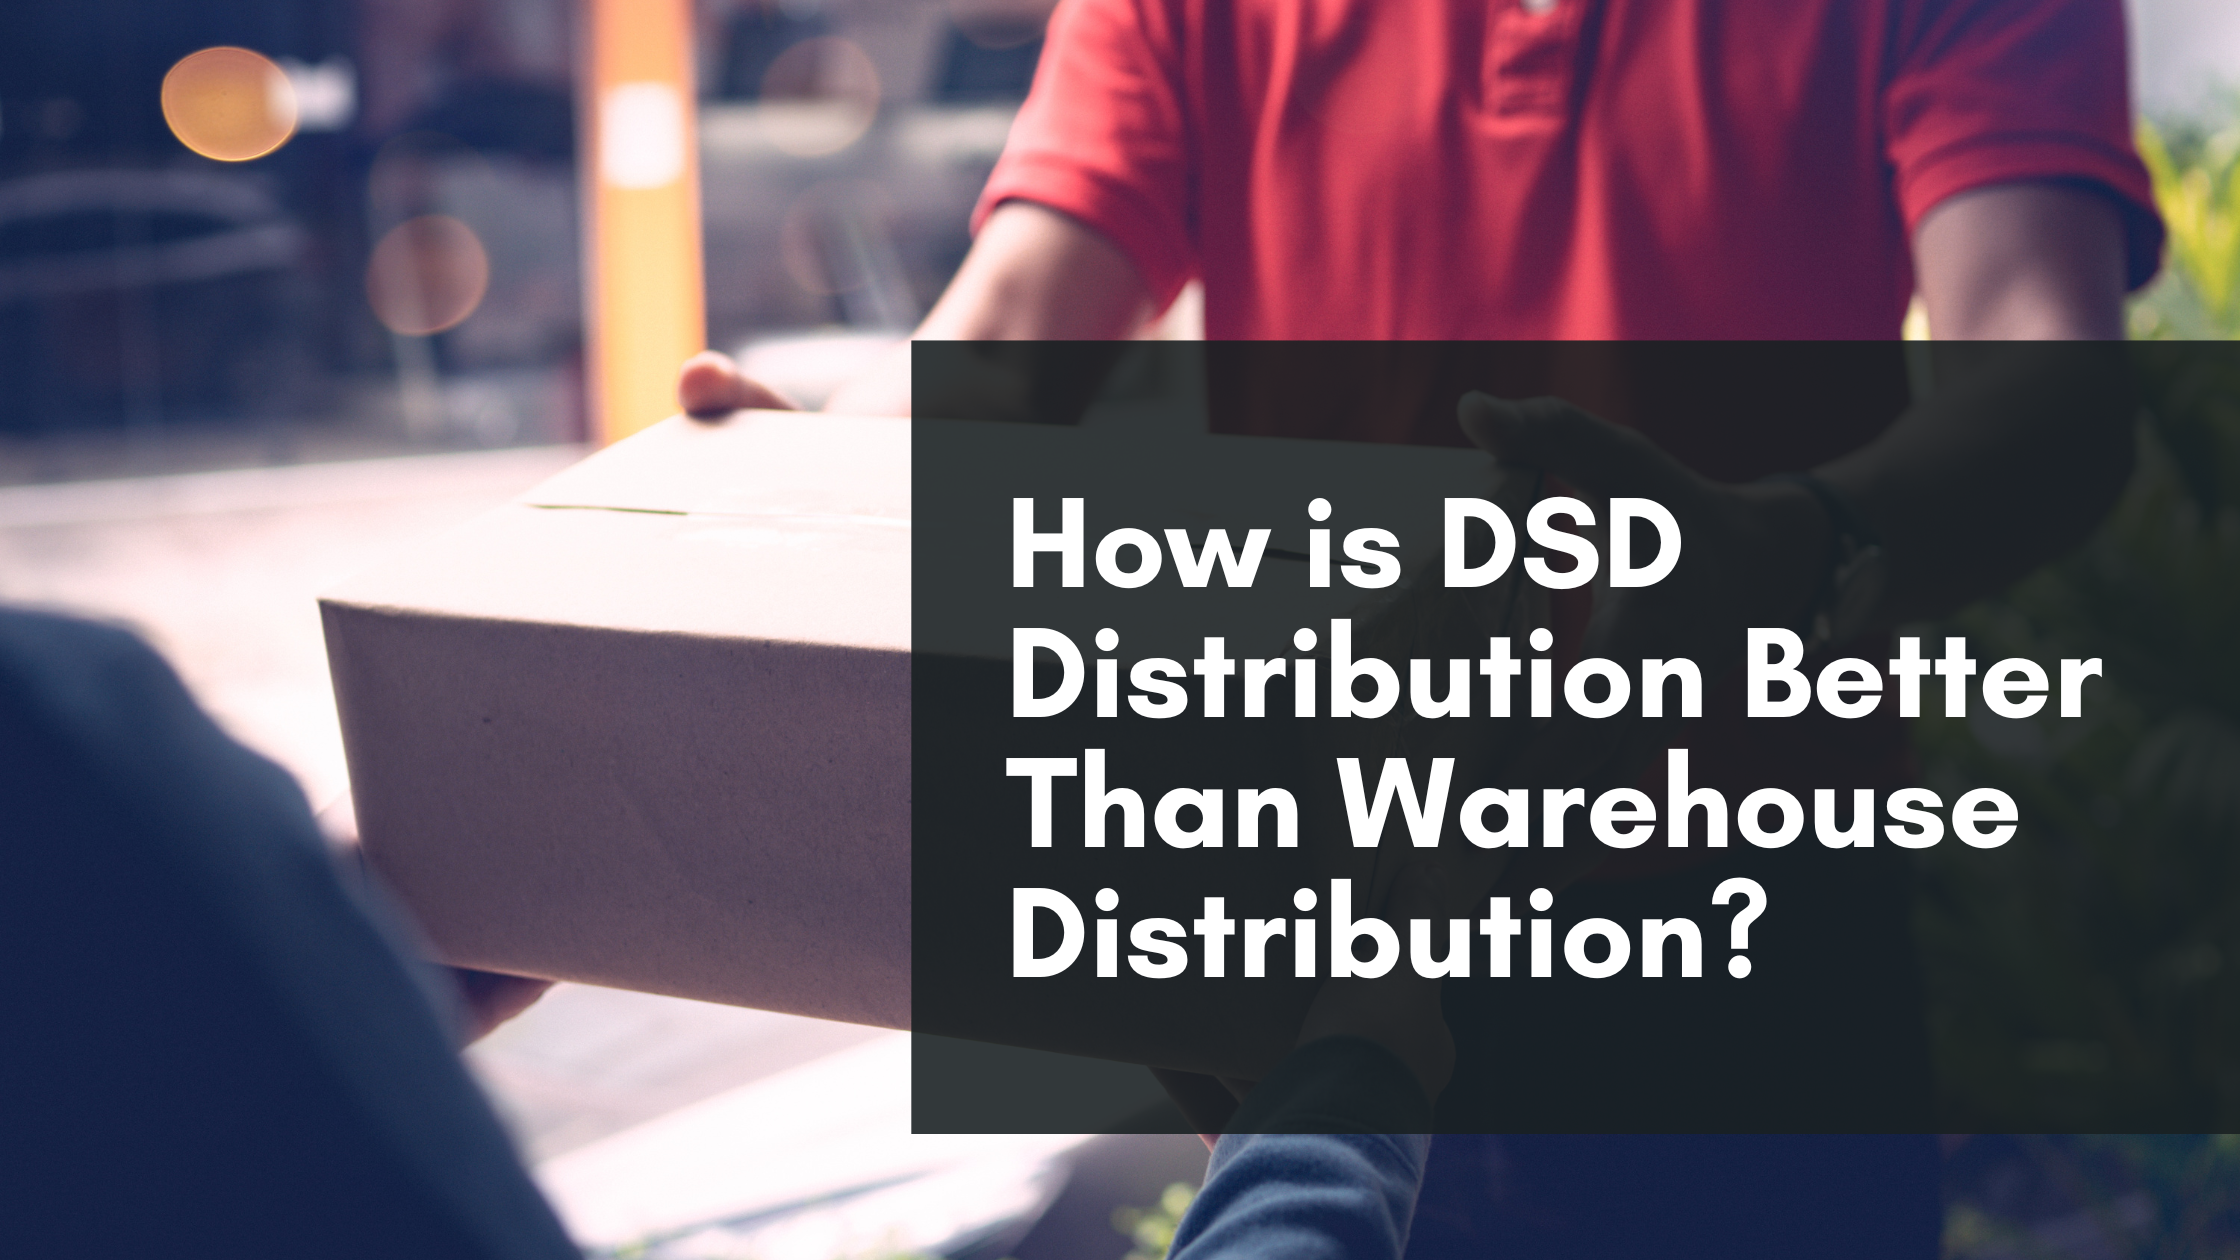 How is DSD Distribution Better Than Warehouse Distribution?